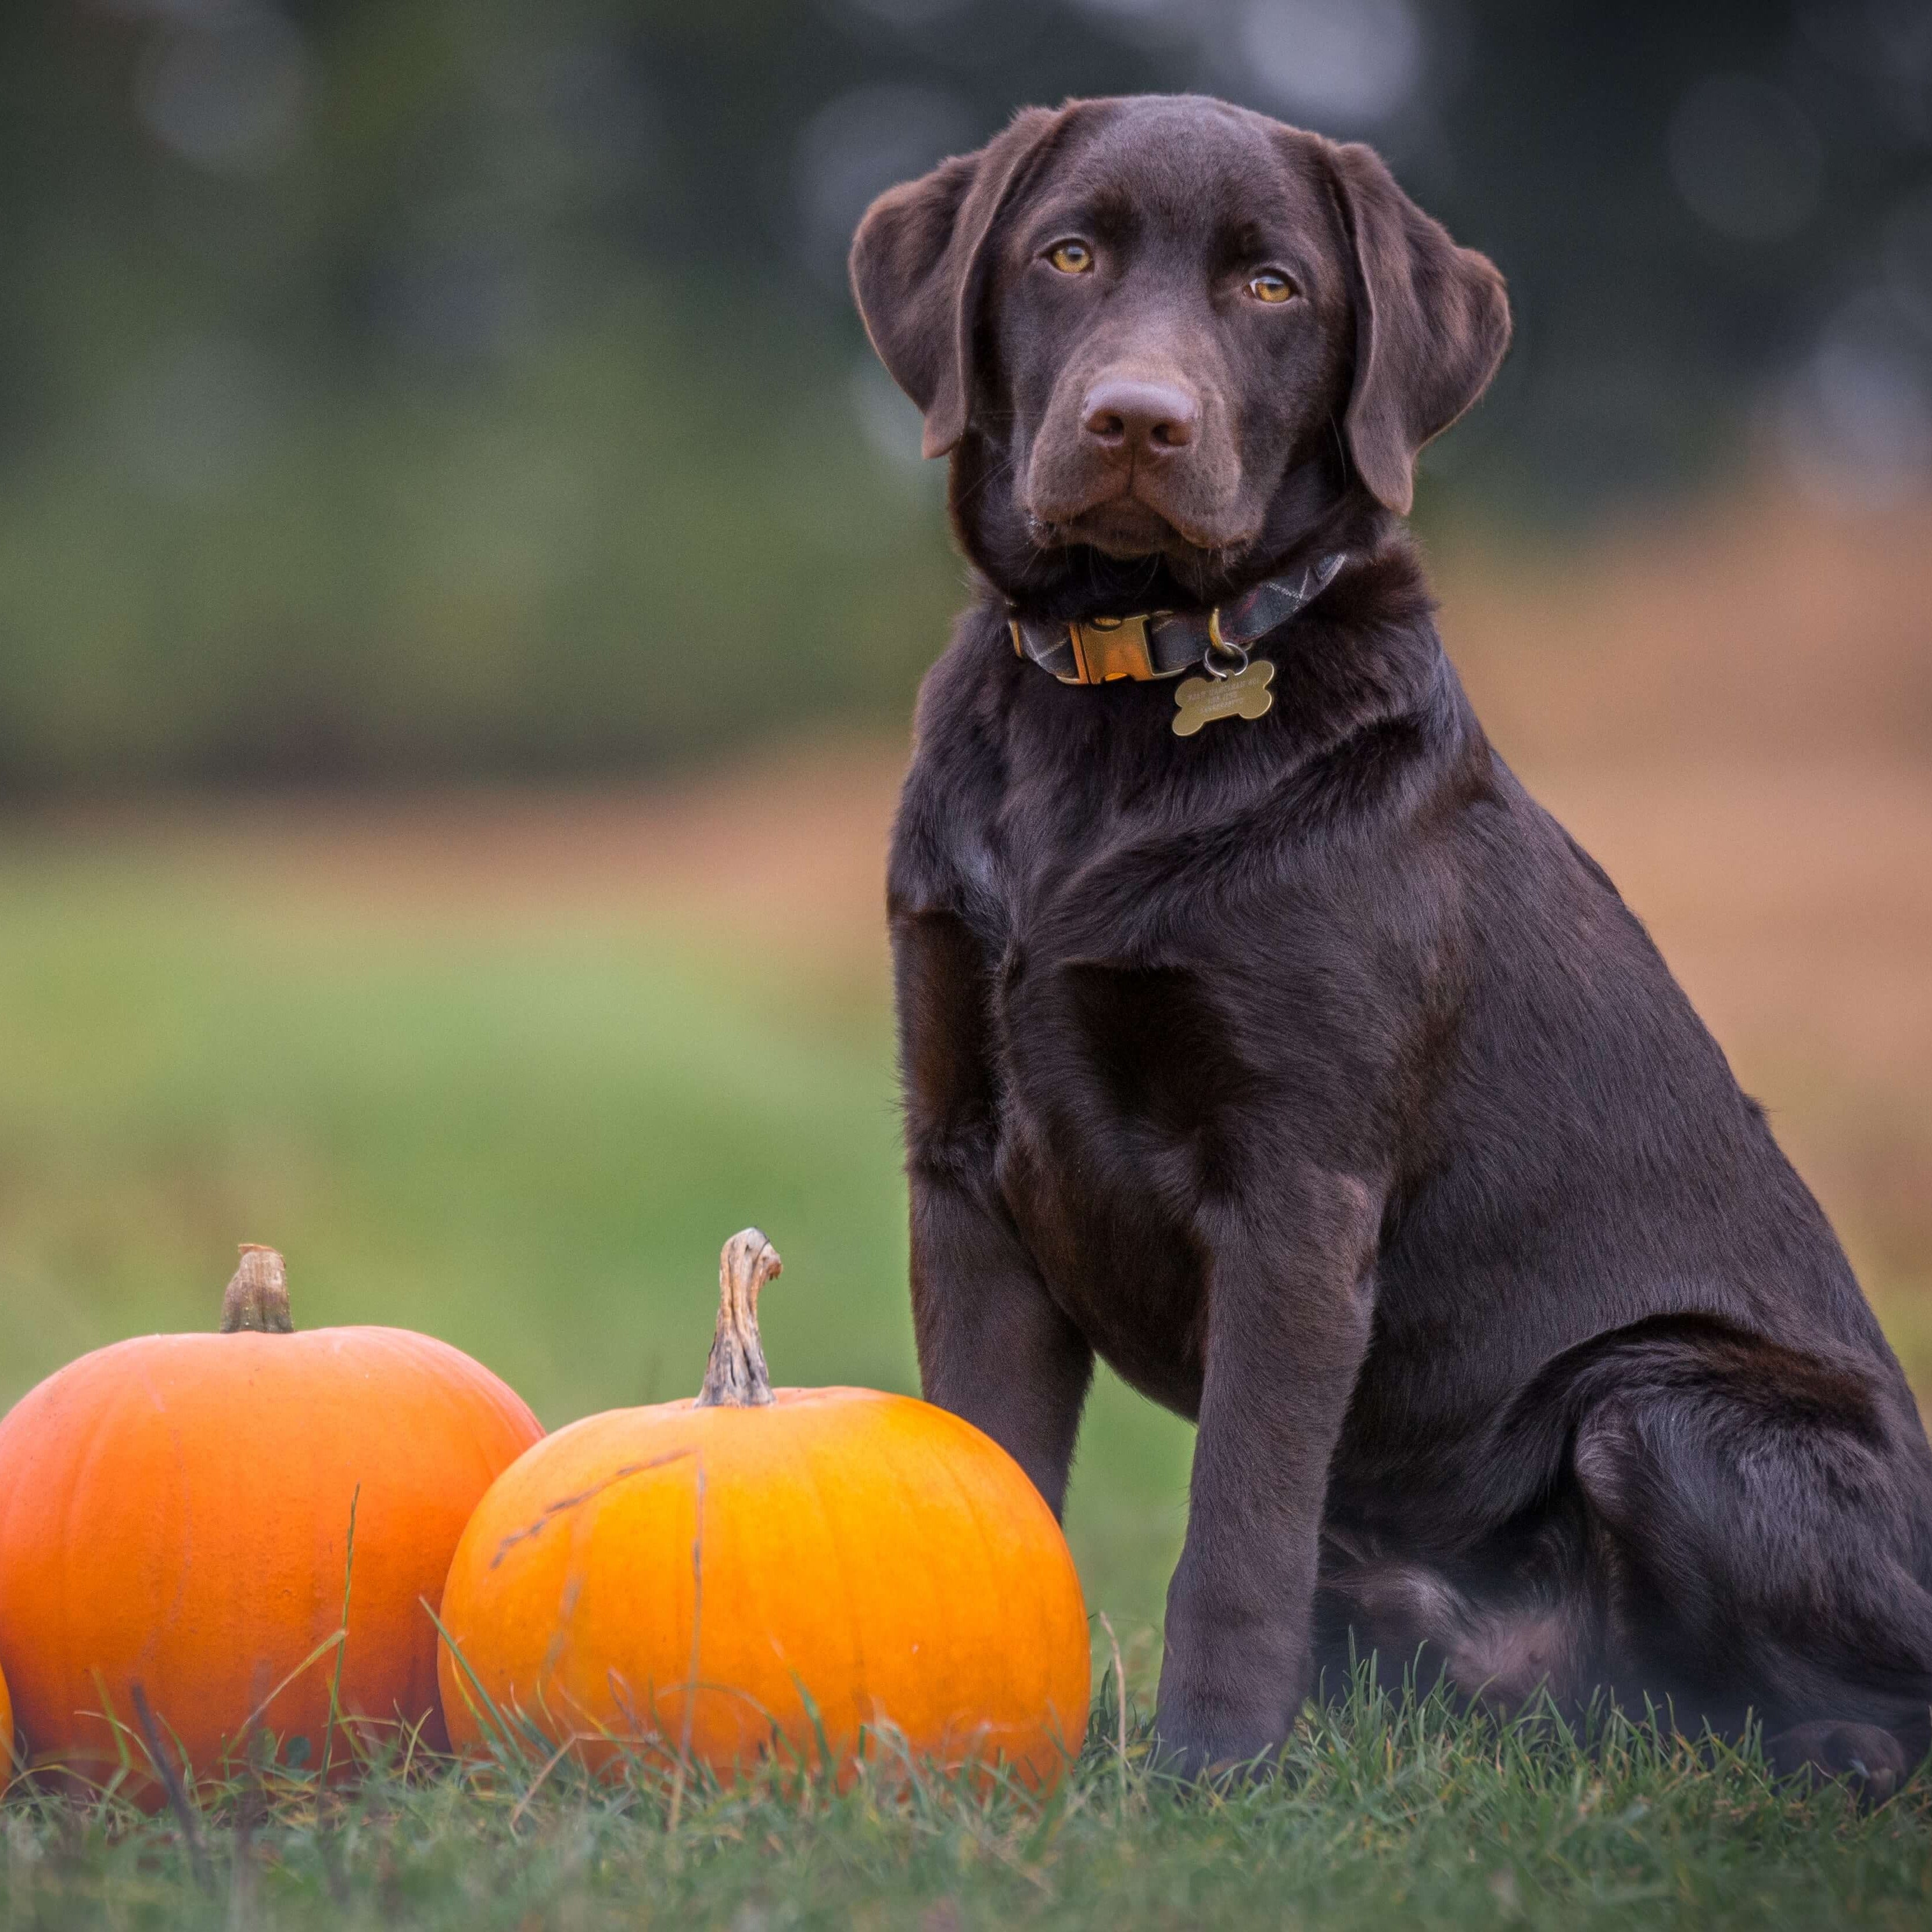 Fall Dog Cookie Package